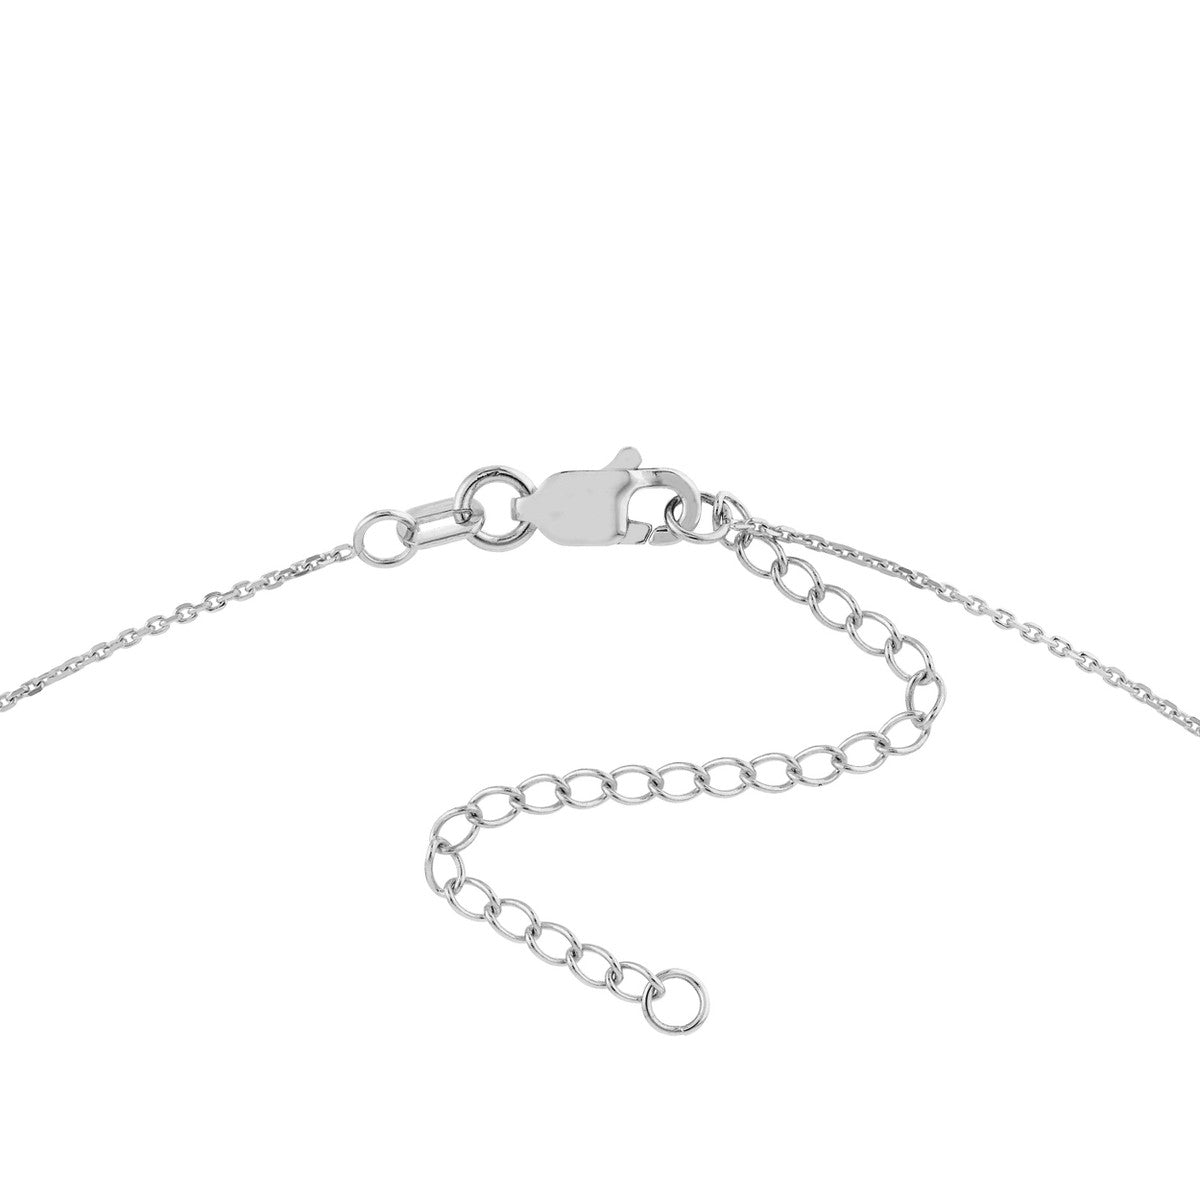 Plated Sterling Silver Engravable Paw Necklace